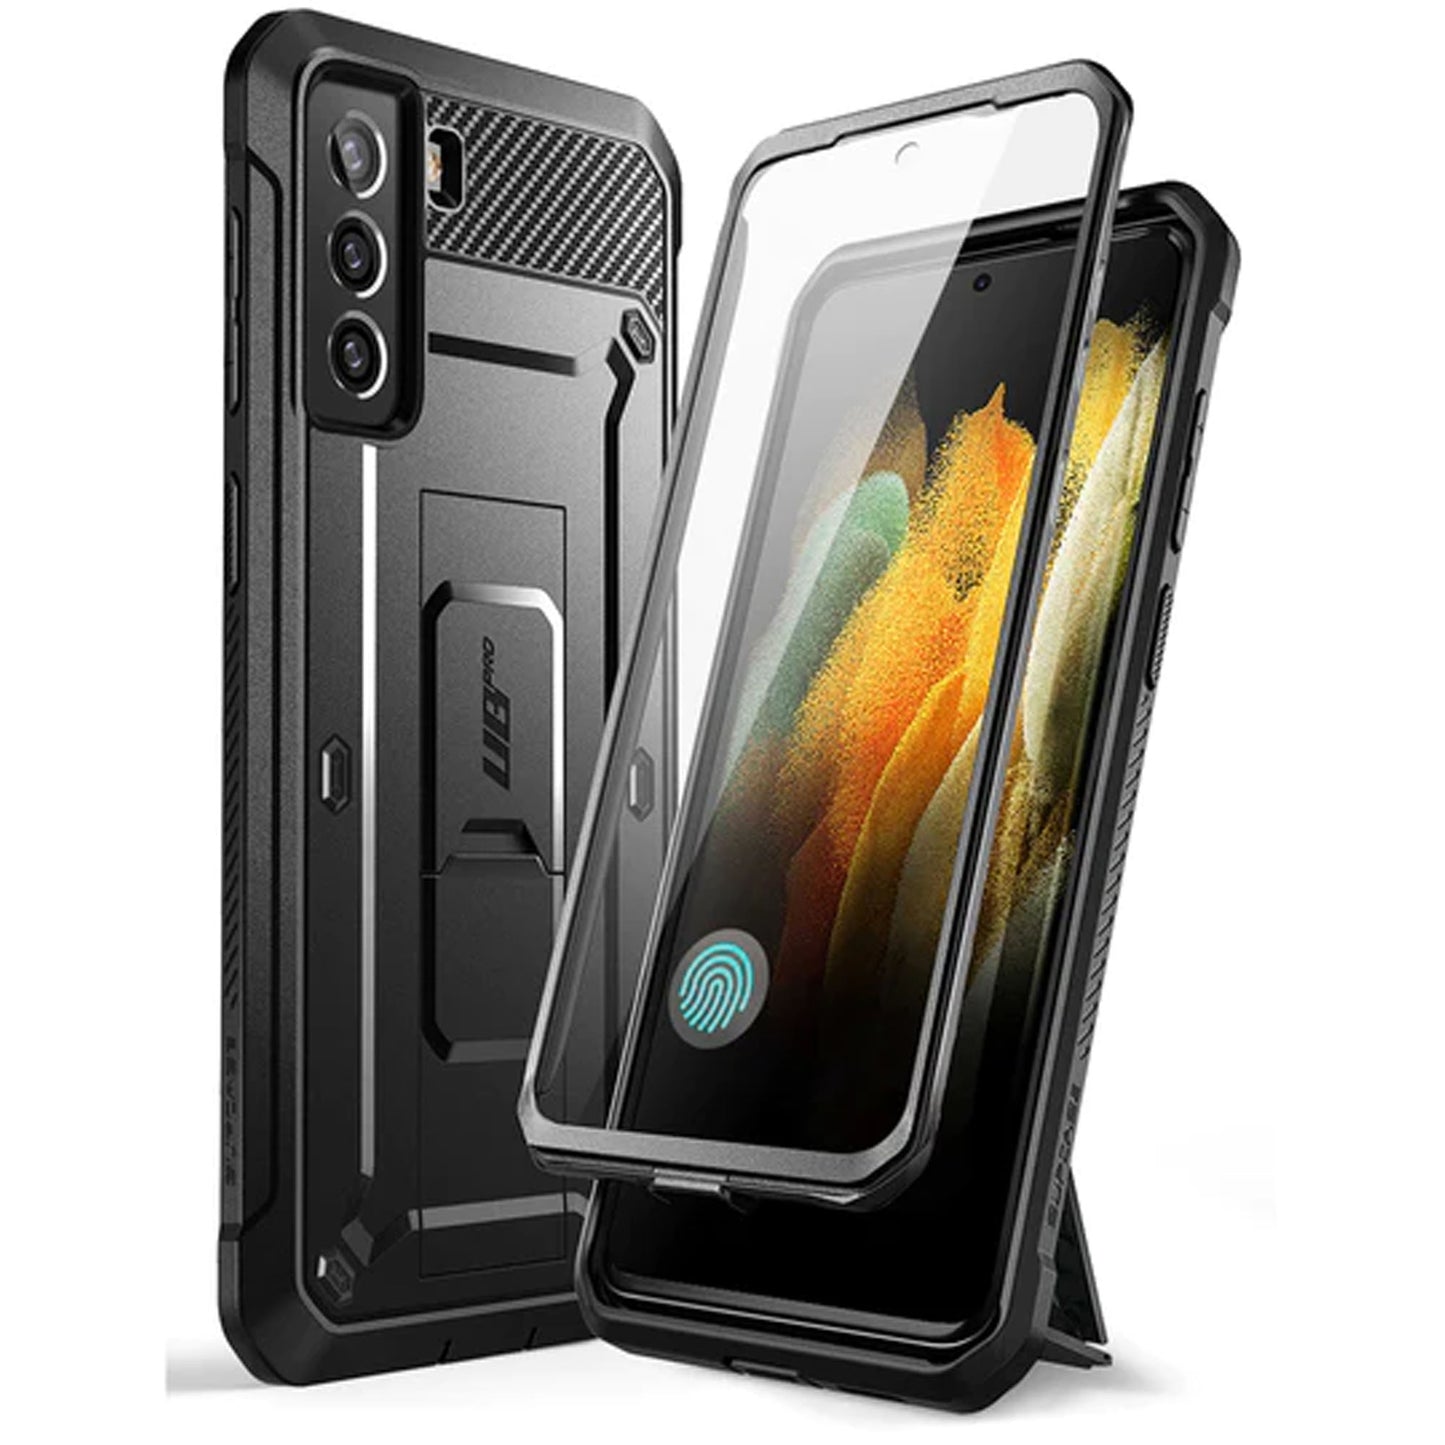 Supcase Unicorn Beetle Pro Rugged Case for Samsung Galaxy S21 FE with Built-in Screen Protector - Black (Barcode: 843439113374 )